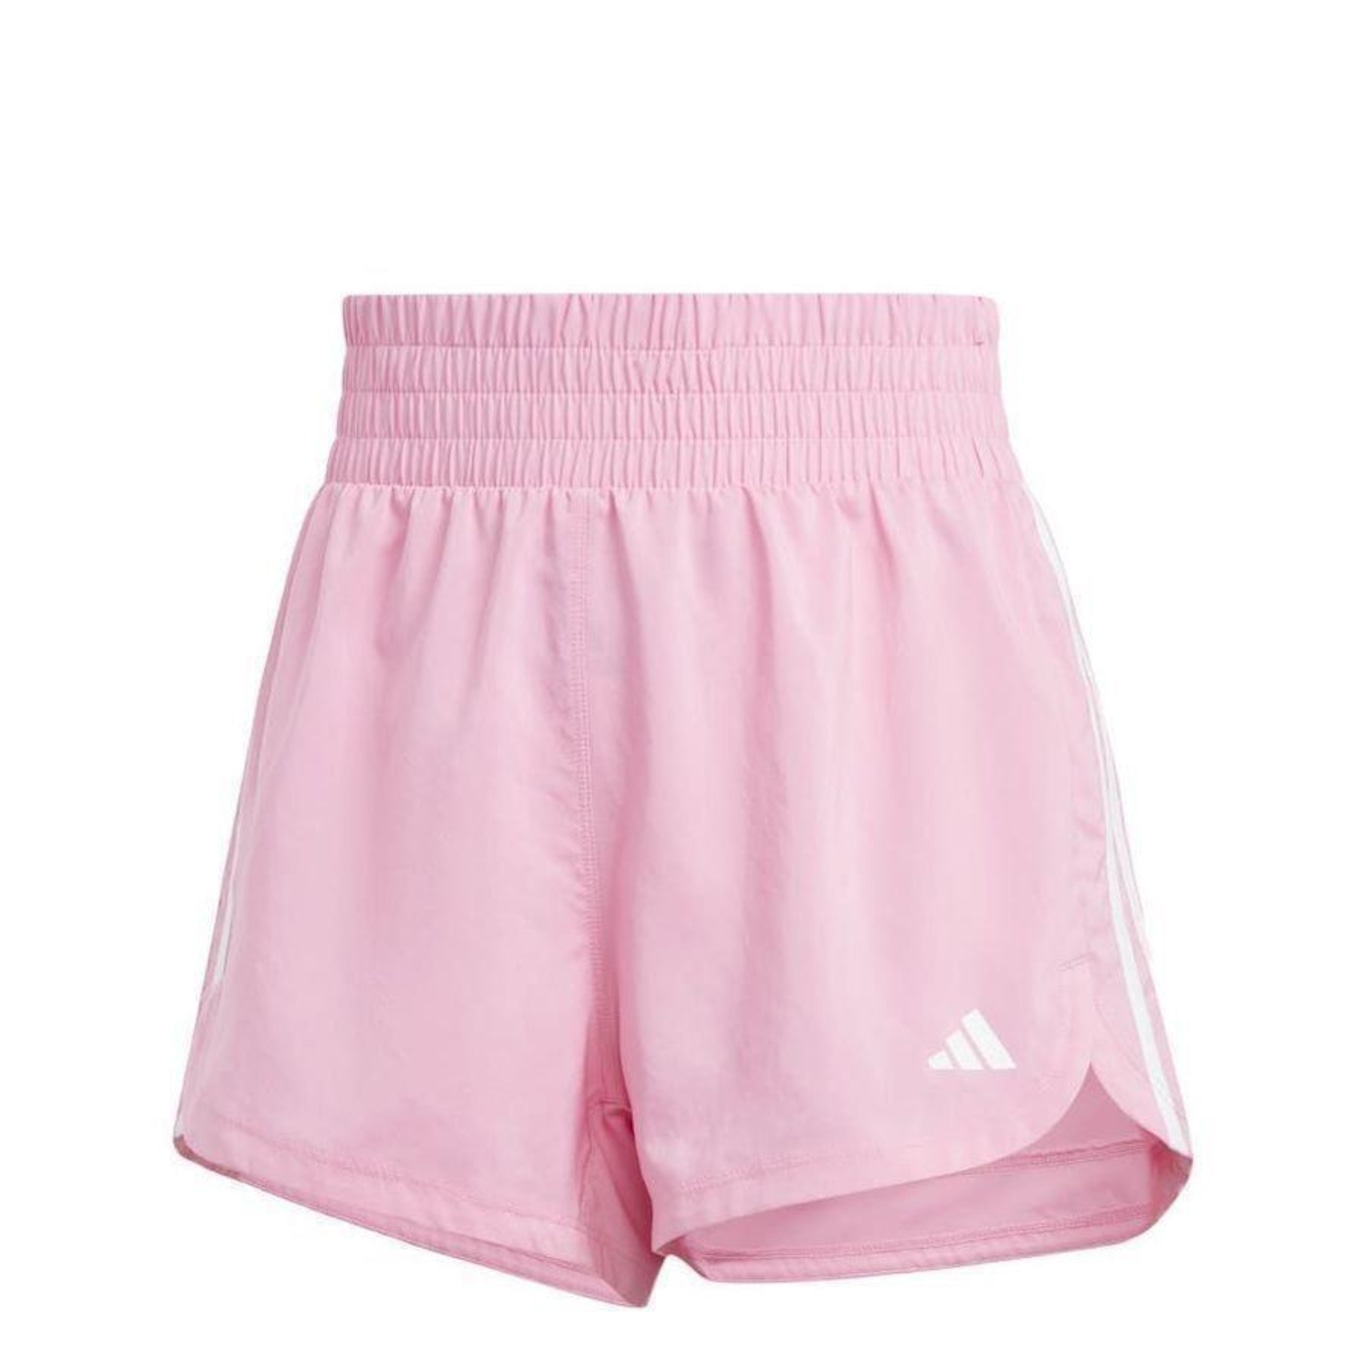 adidas Pacer 3-Stripes Woven Training Shorts - White